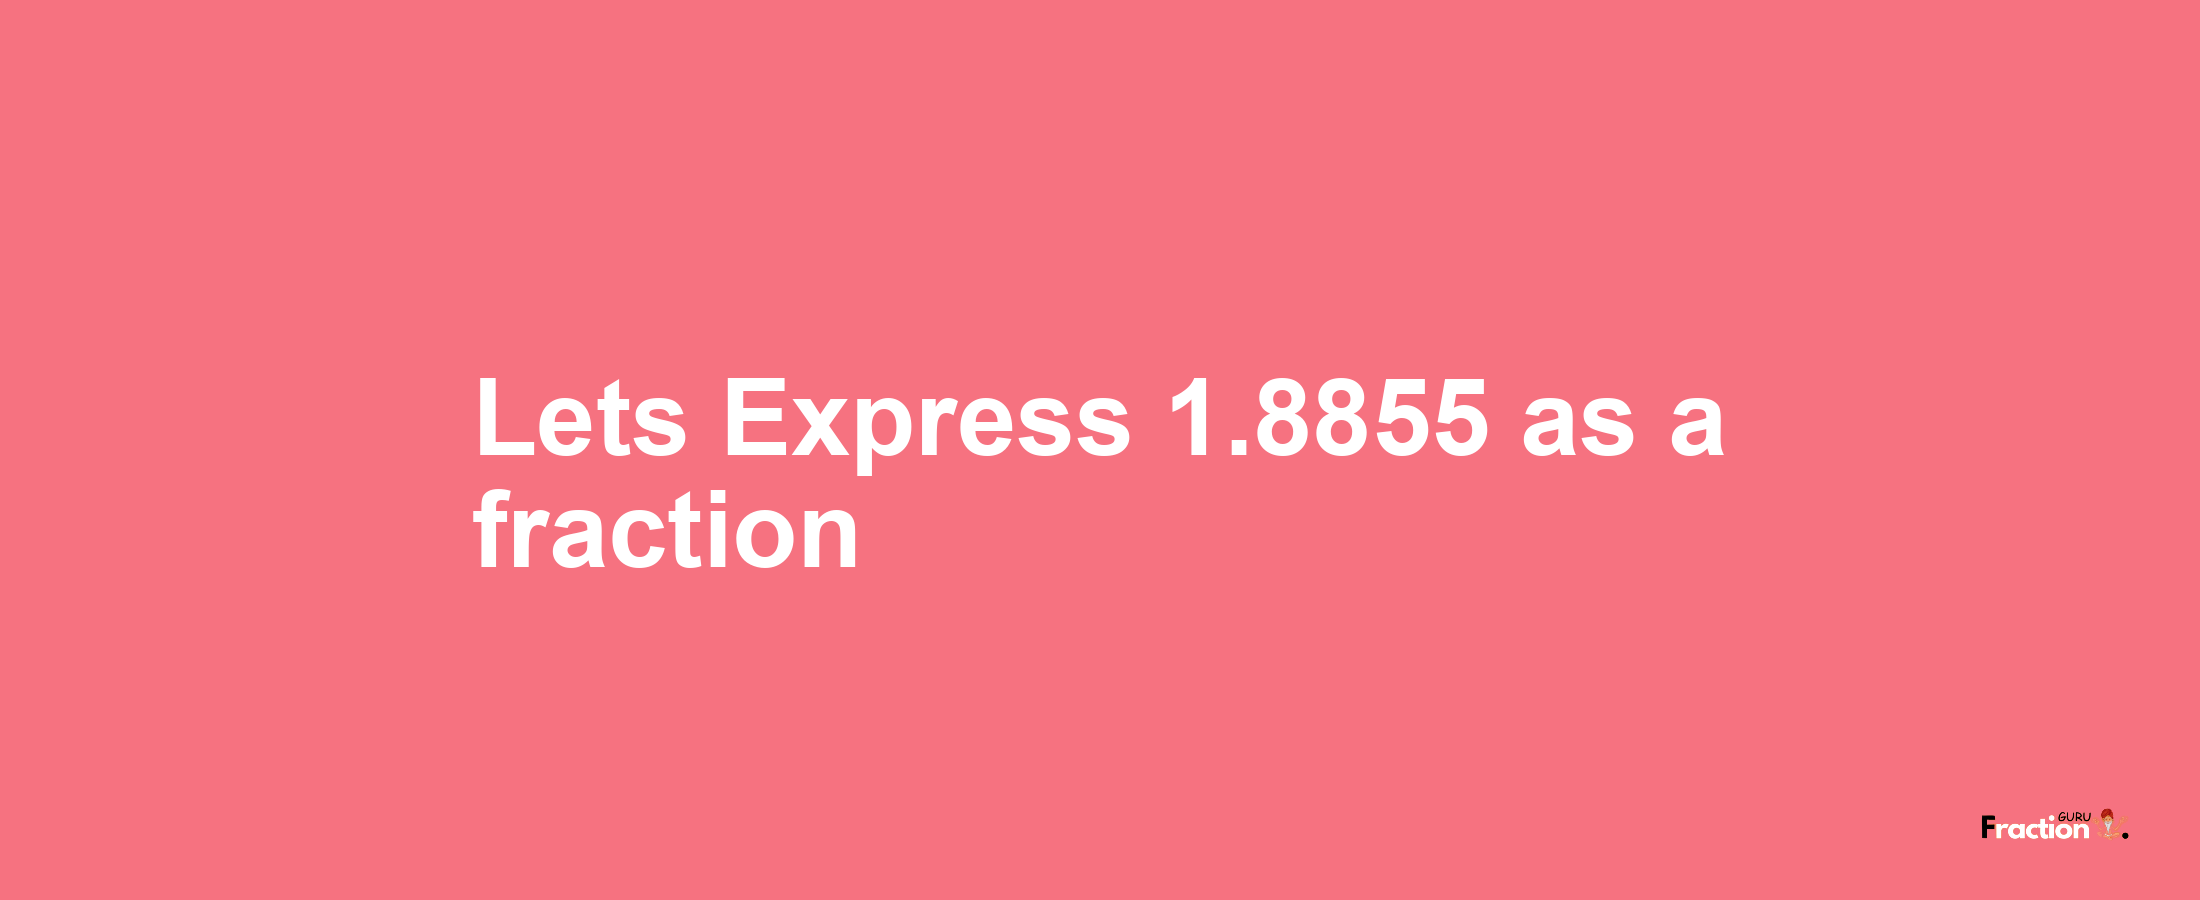 Lets Express 1.8855 as afraction